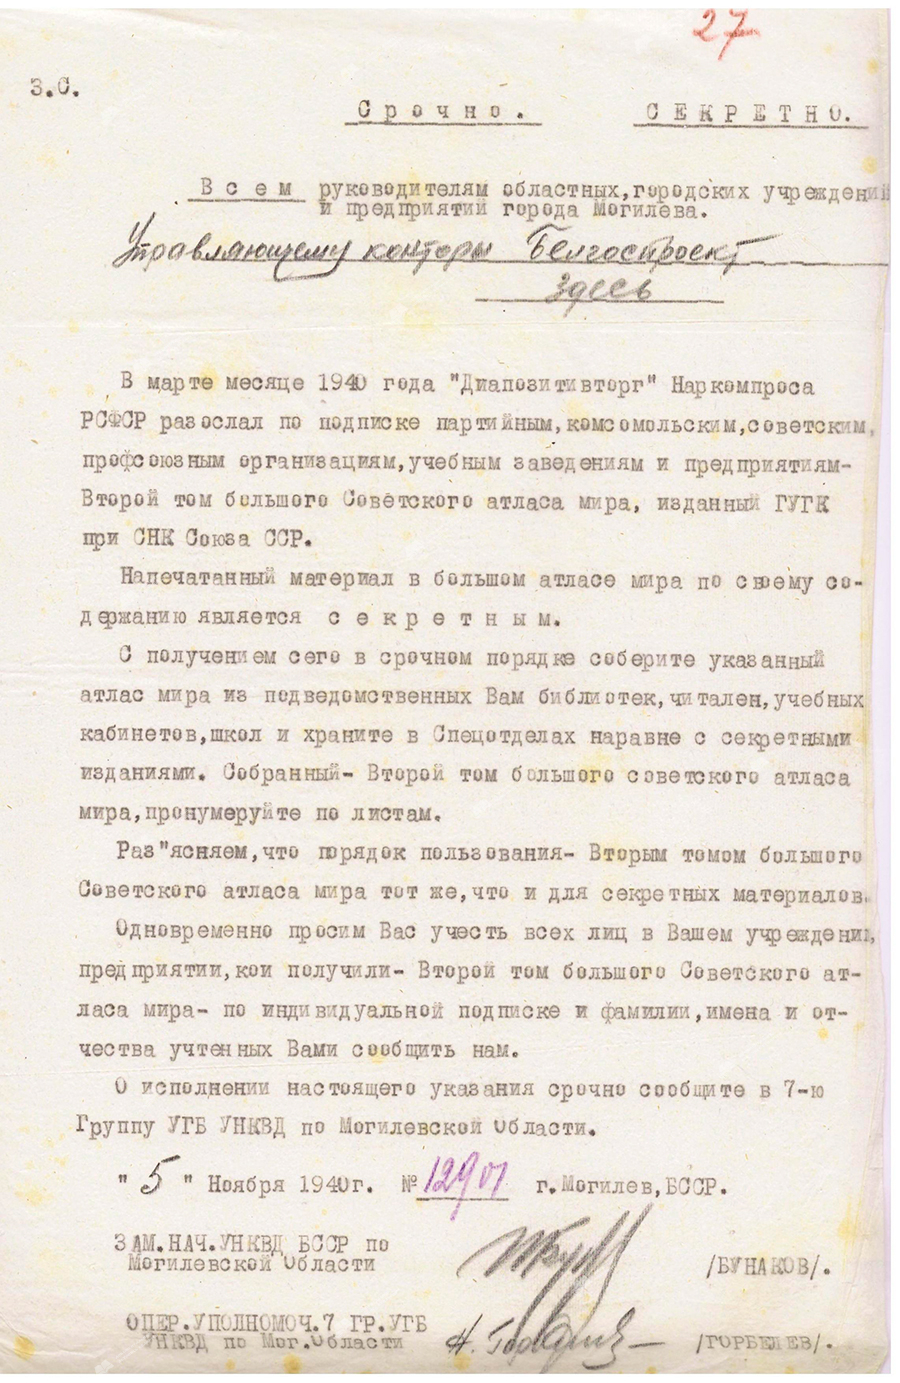 Letter from the Department of the People's Commissariat of Internal Affairs for the Mogilev Region to the heads of regional, city institutions and enterprises of the city of Mogilev on the procedure for storing and using the second volume of the Great Soviet Atlas of the World in institutions and organizations of the city of Mogilev-стр. 0